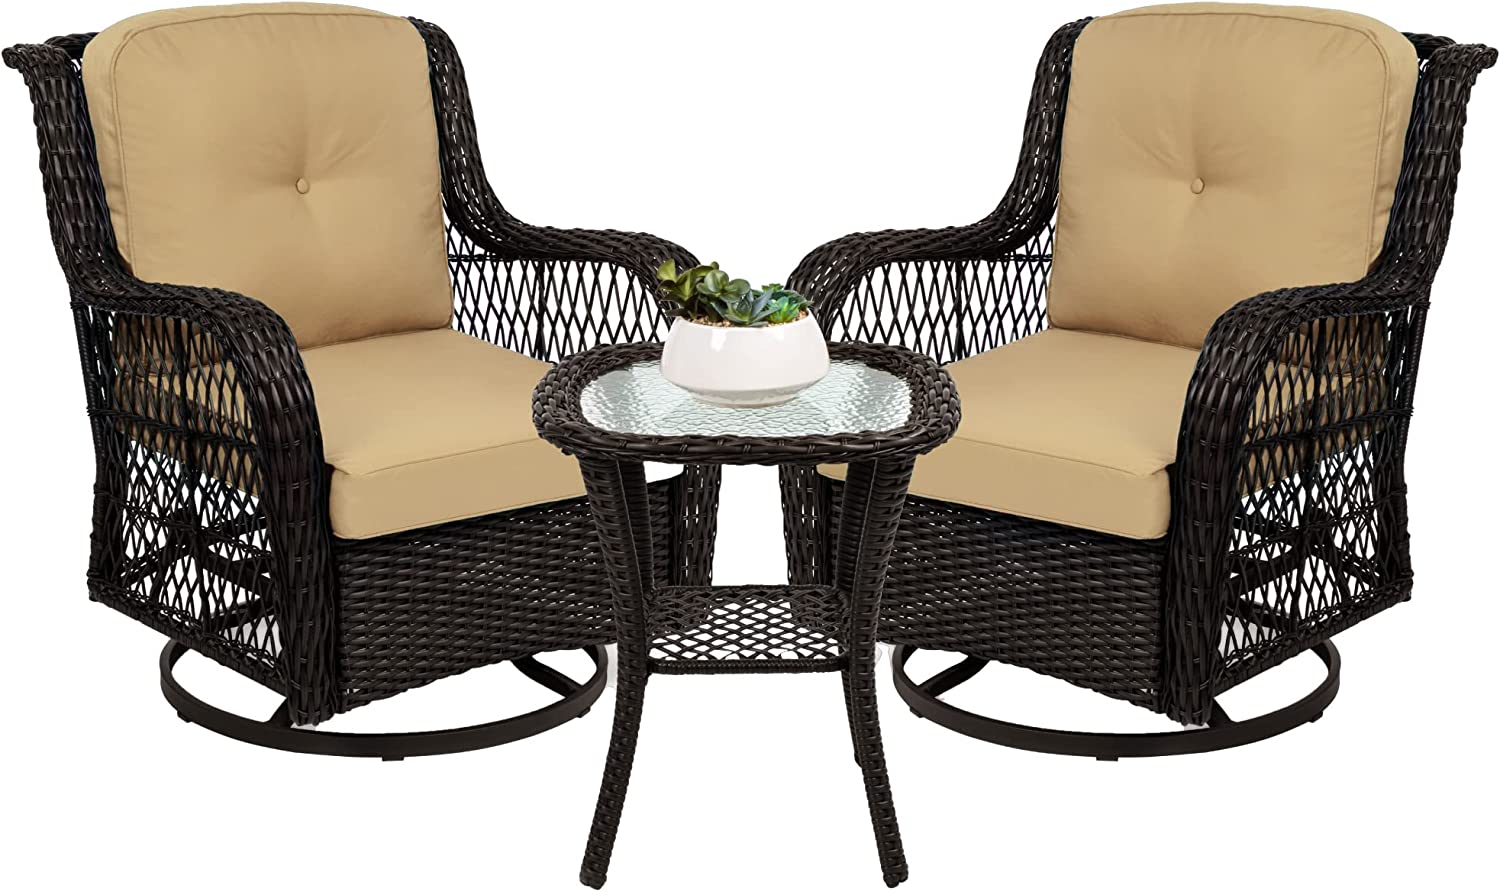 Best Choice Products Full Rotation Swivel Patio Bistro Chairs, 3-Piece